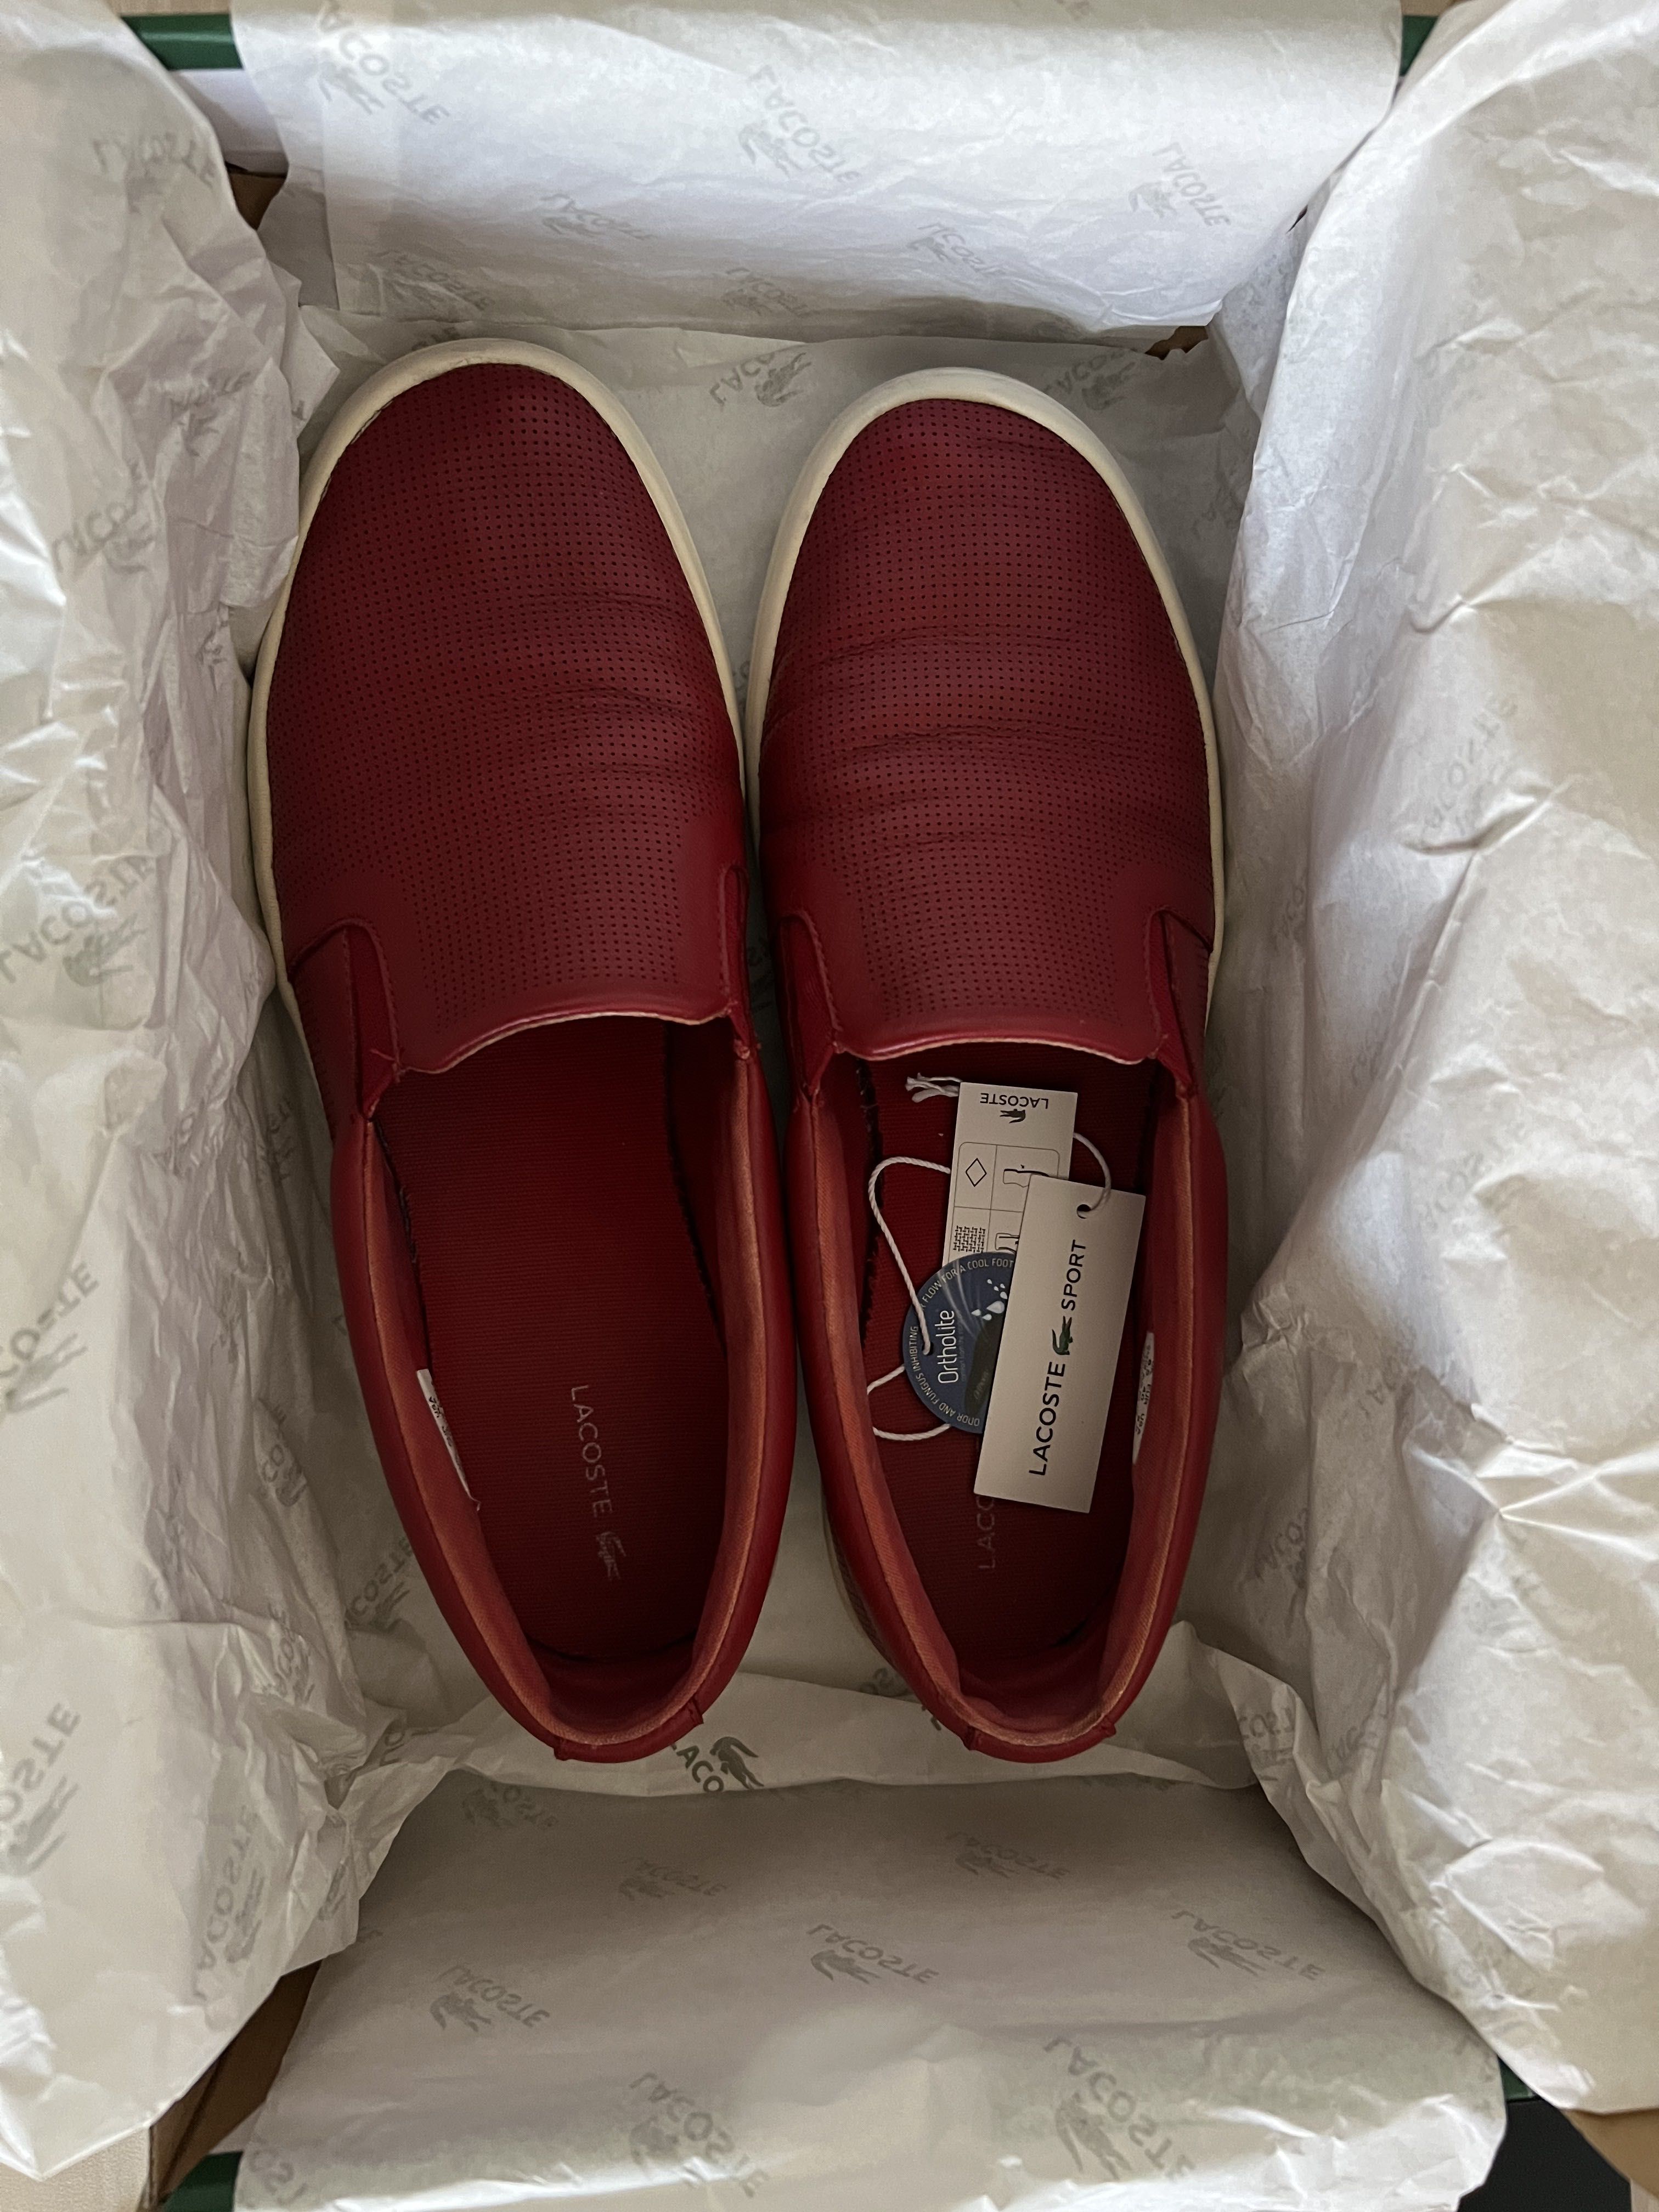 Lacoste Gazon Sport, Sneakers Shoes, Red Leather, Size:40 EU